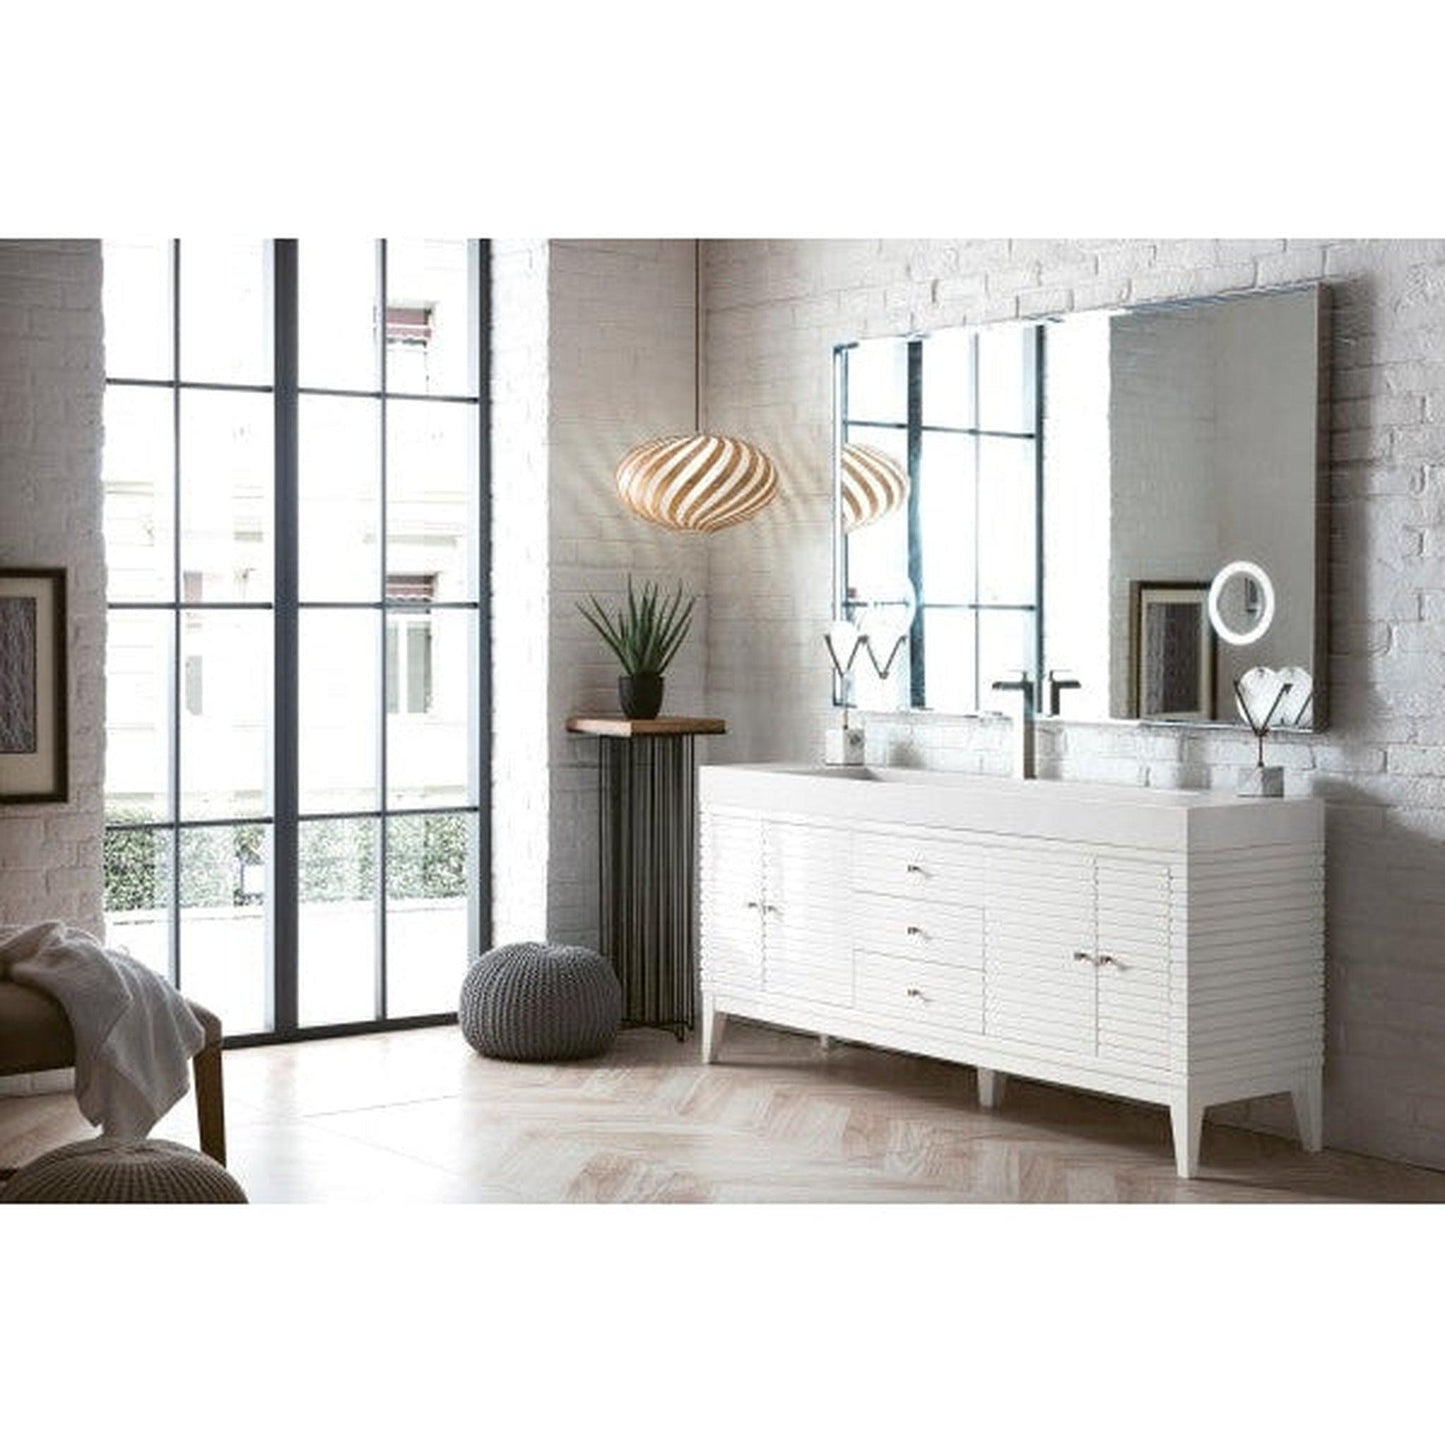 James Martin Linear 73" Single Glossy White Bathroom Vanity With 6" Glossy White Composite Countertop